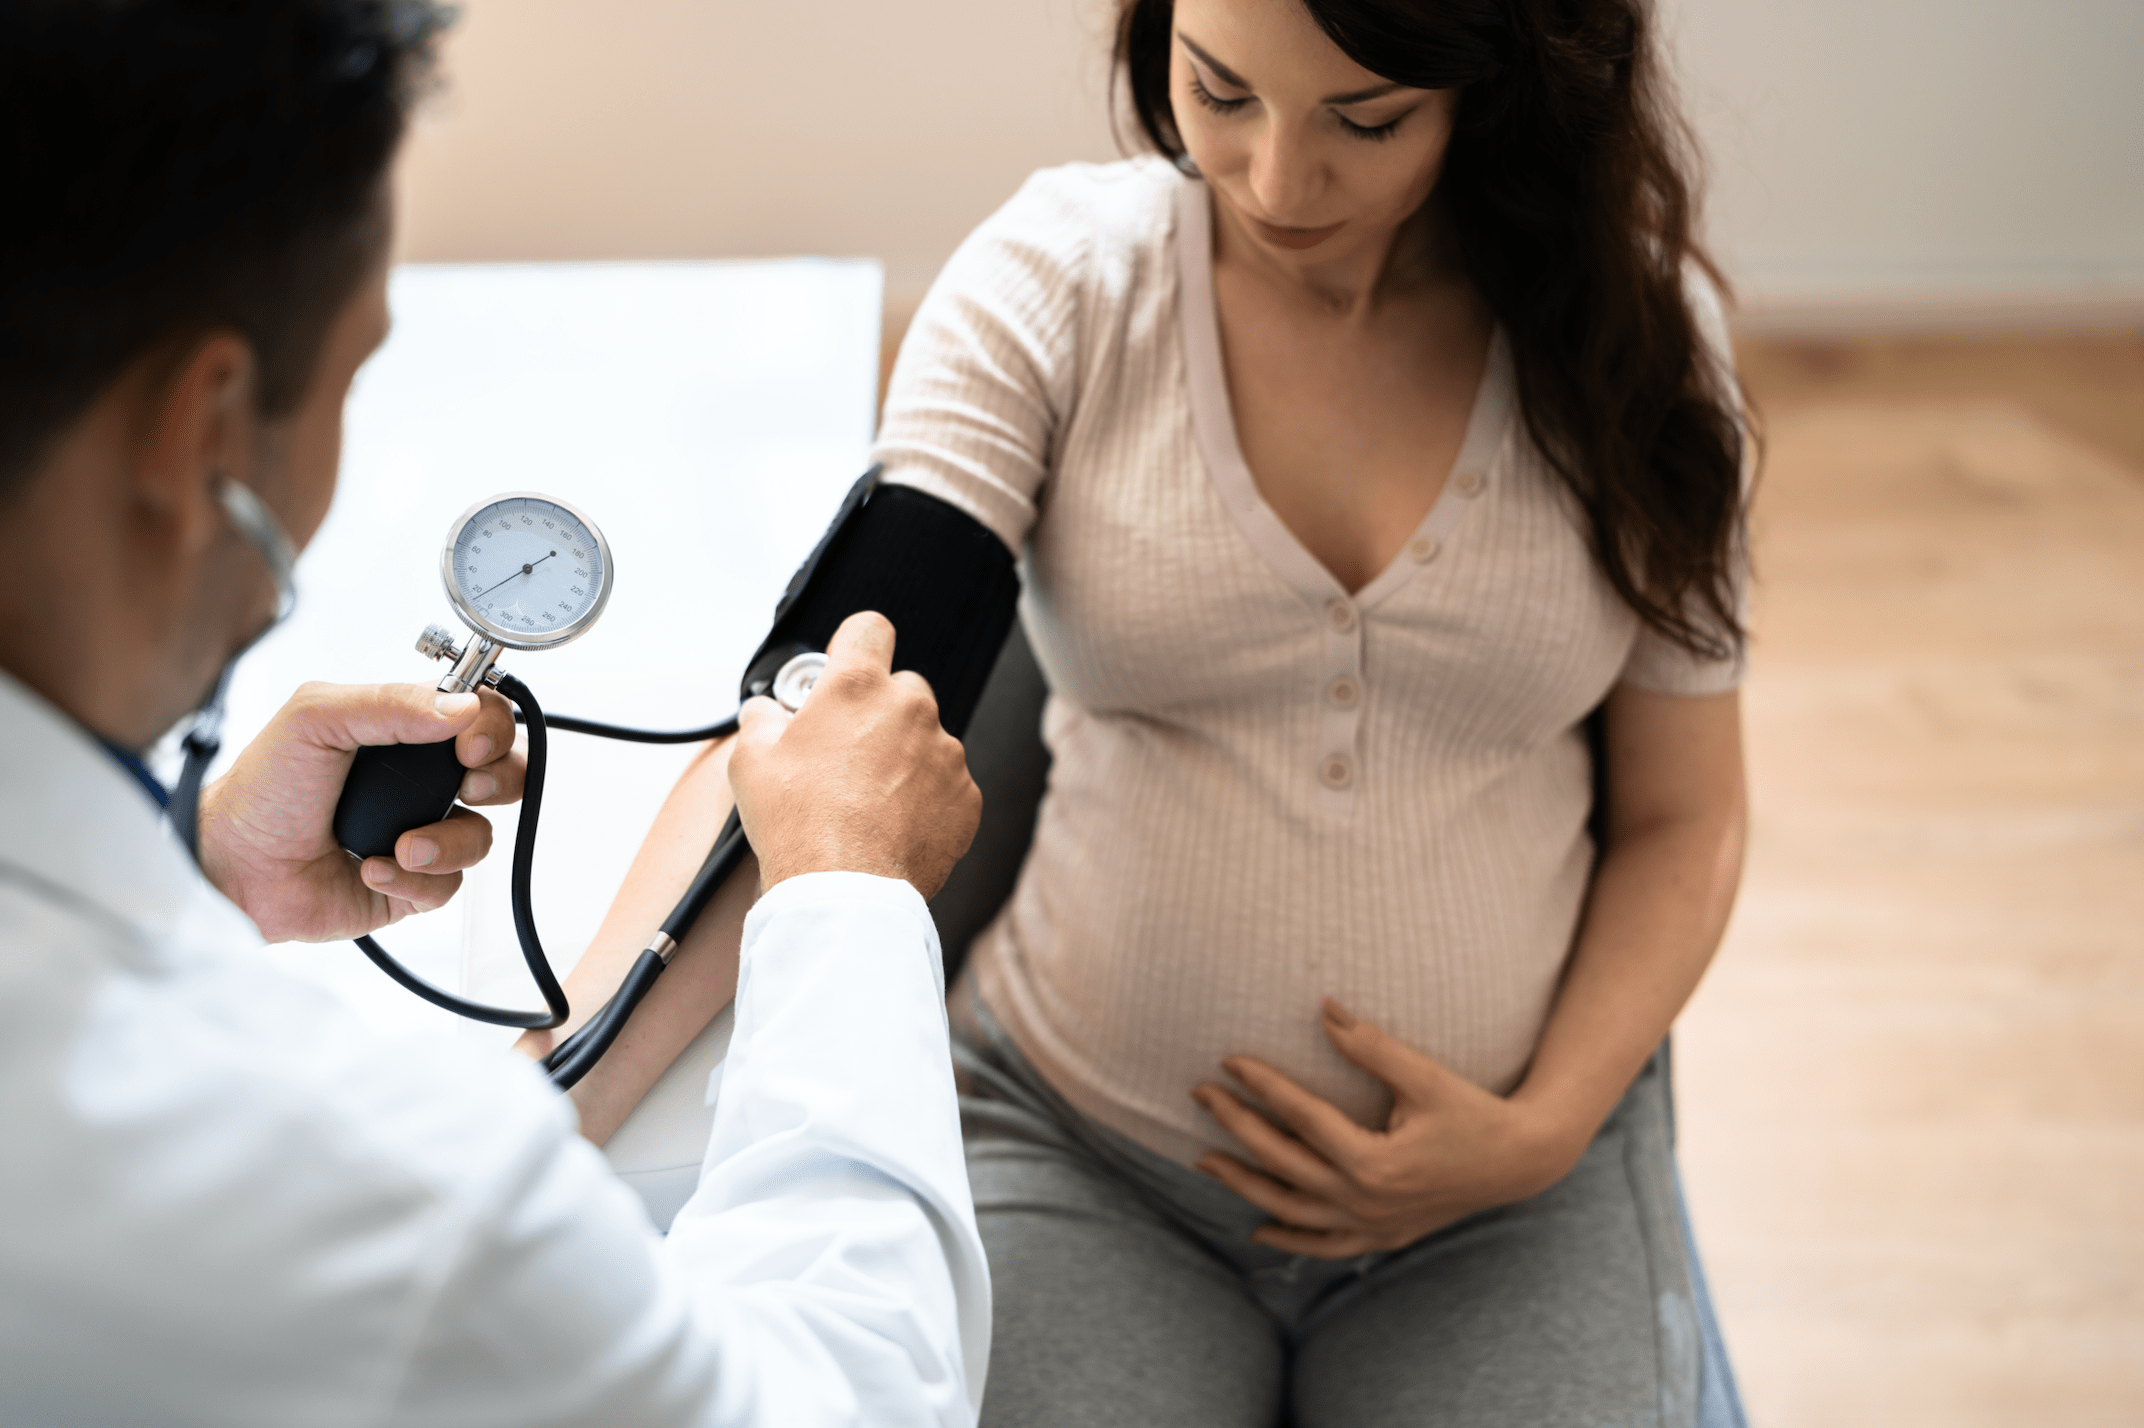 case study of a pregnant woman with hypertension